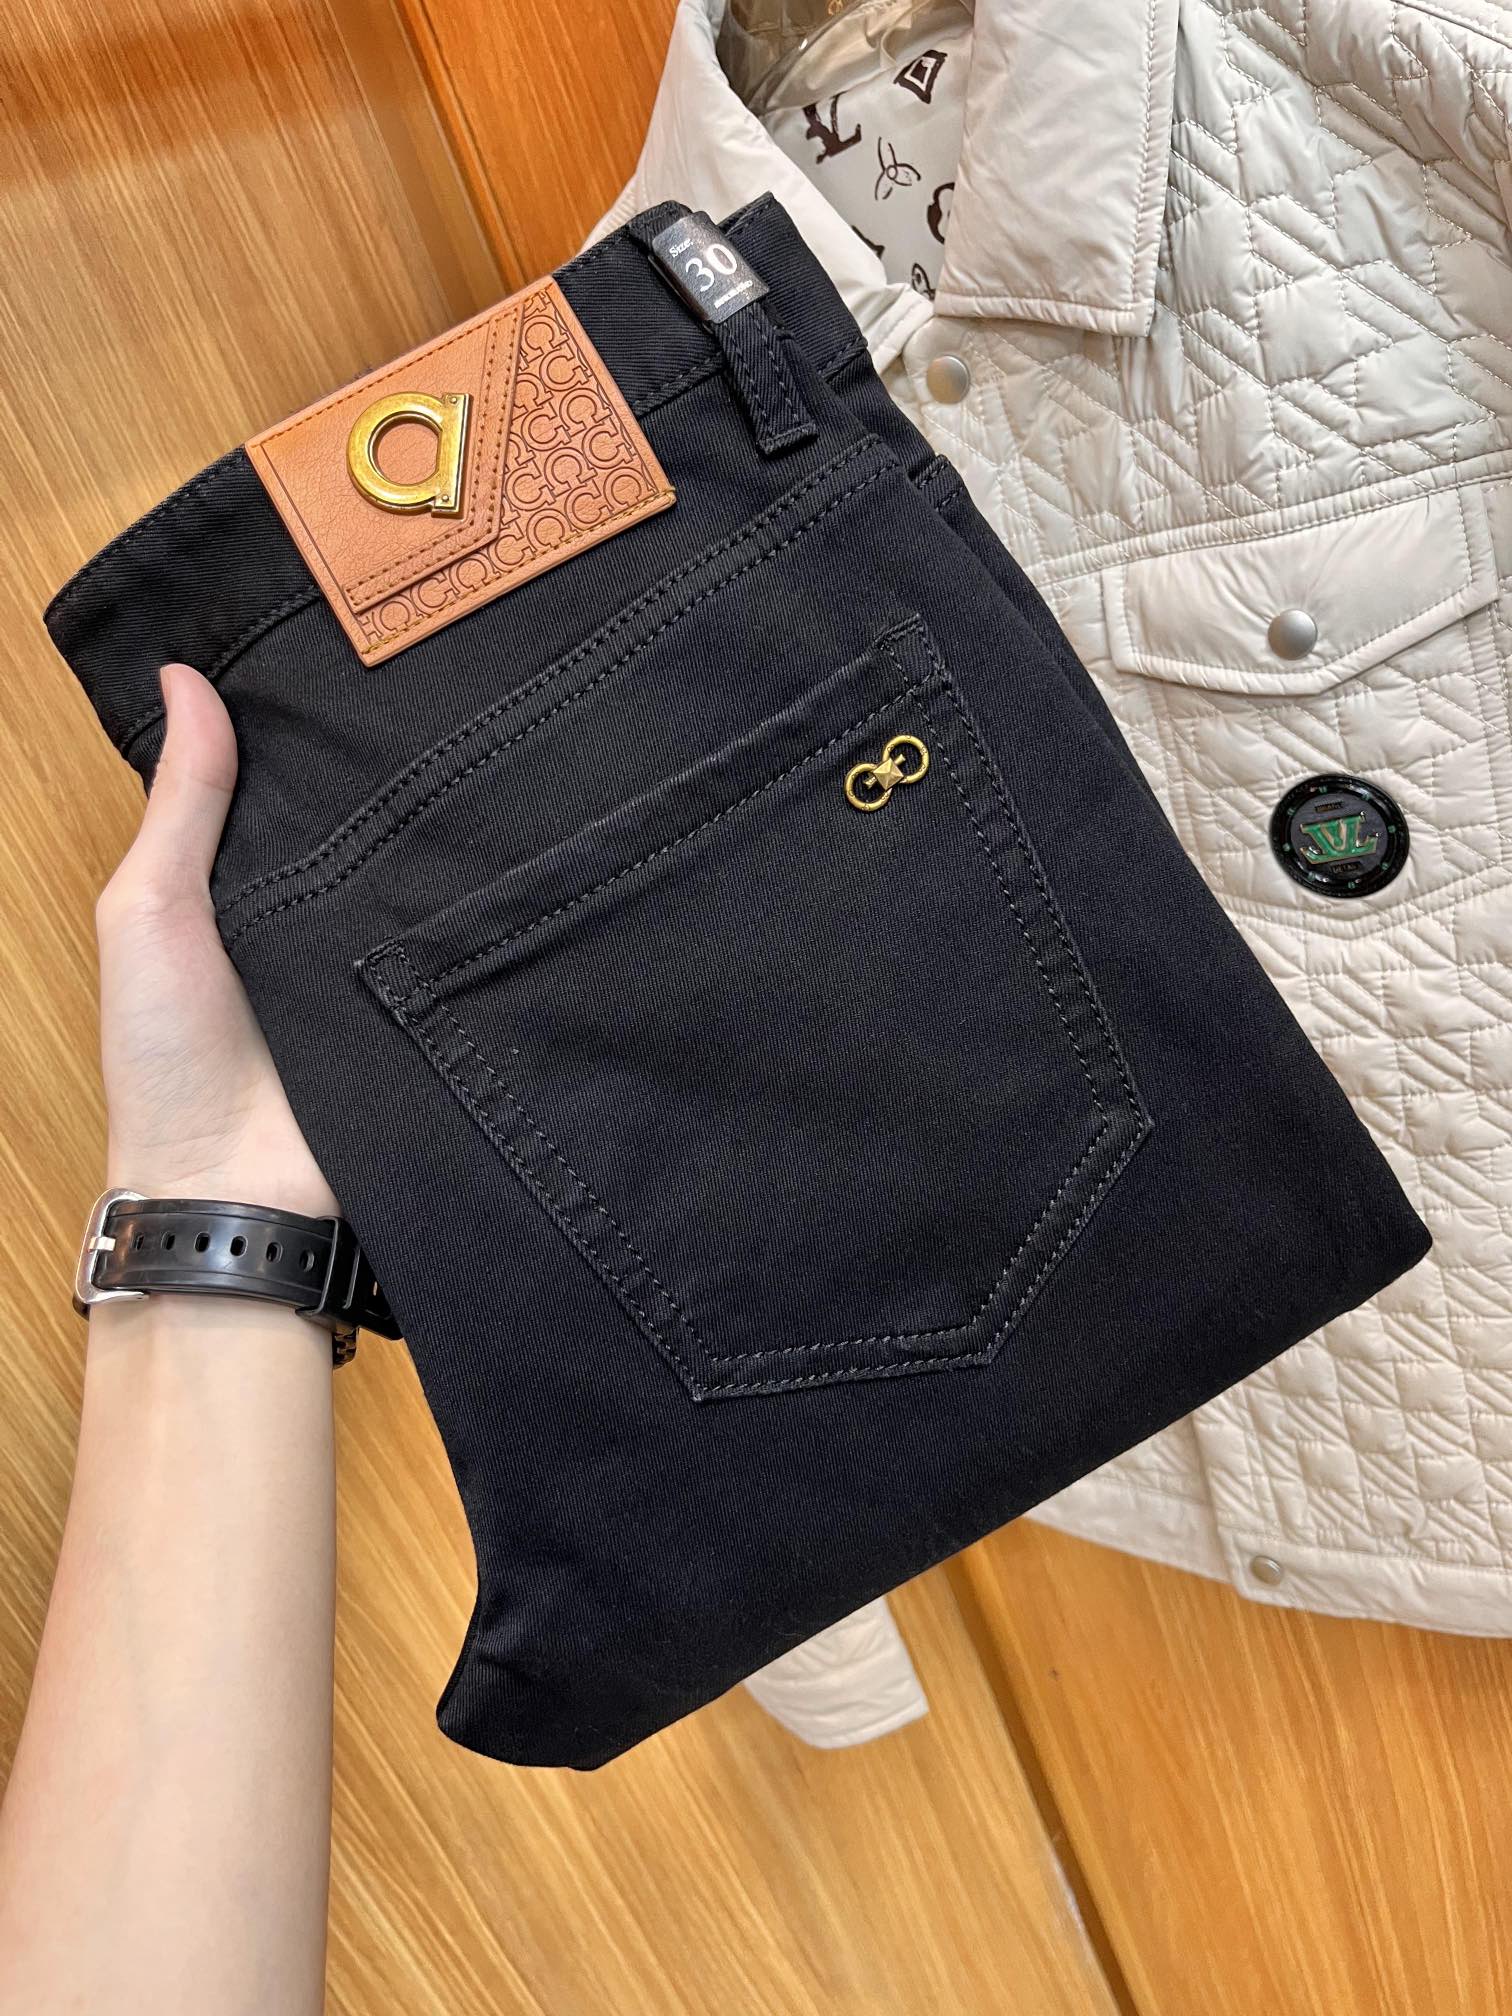 Ferragamo Clothing Jeans Best Quality Replica Cotton Fall/Winter Collection Casual